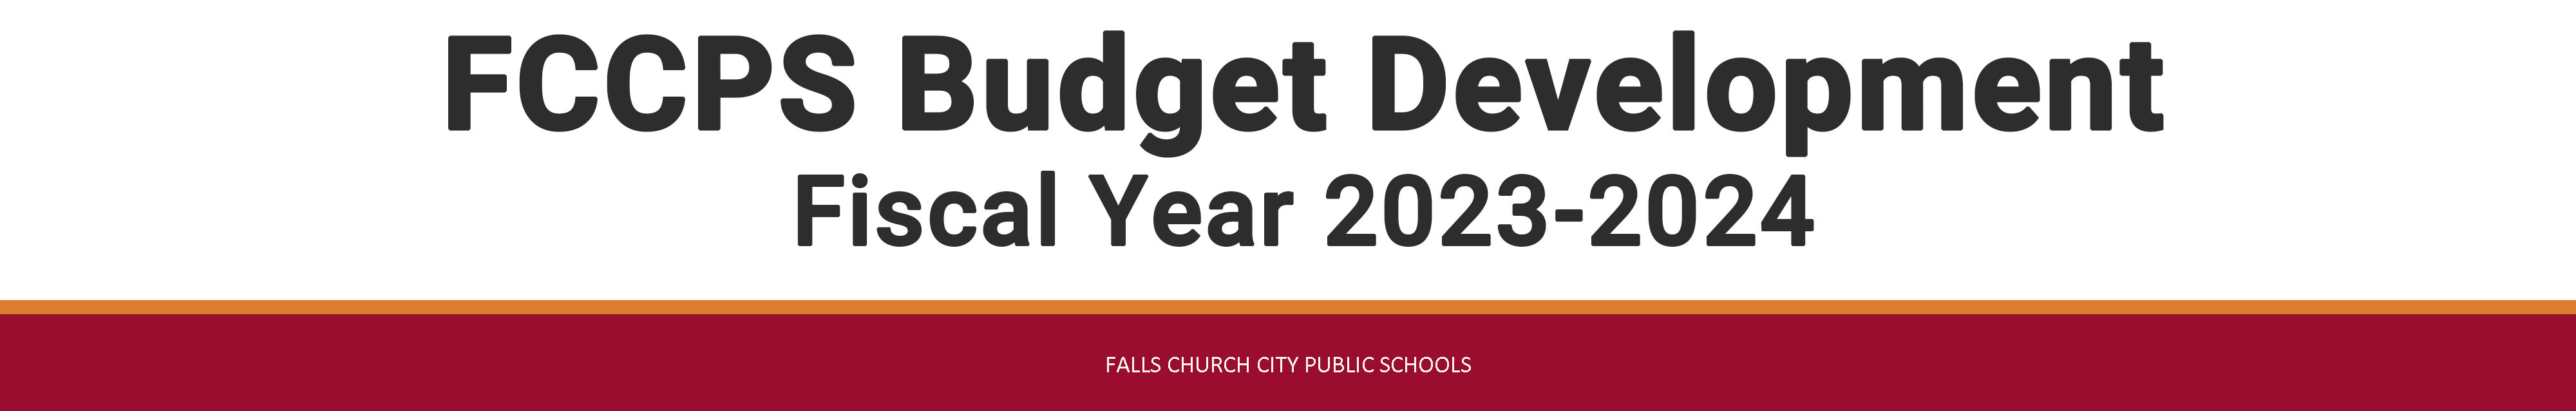 Falls Church City Public Schools Budget Development page for Fiscal Year 2024-2025